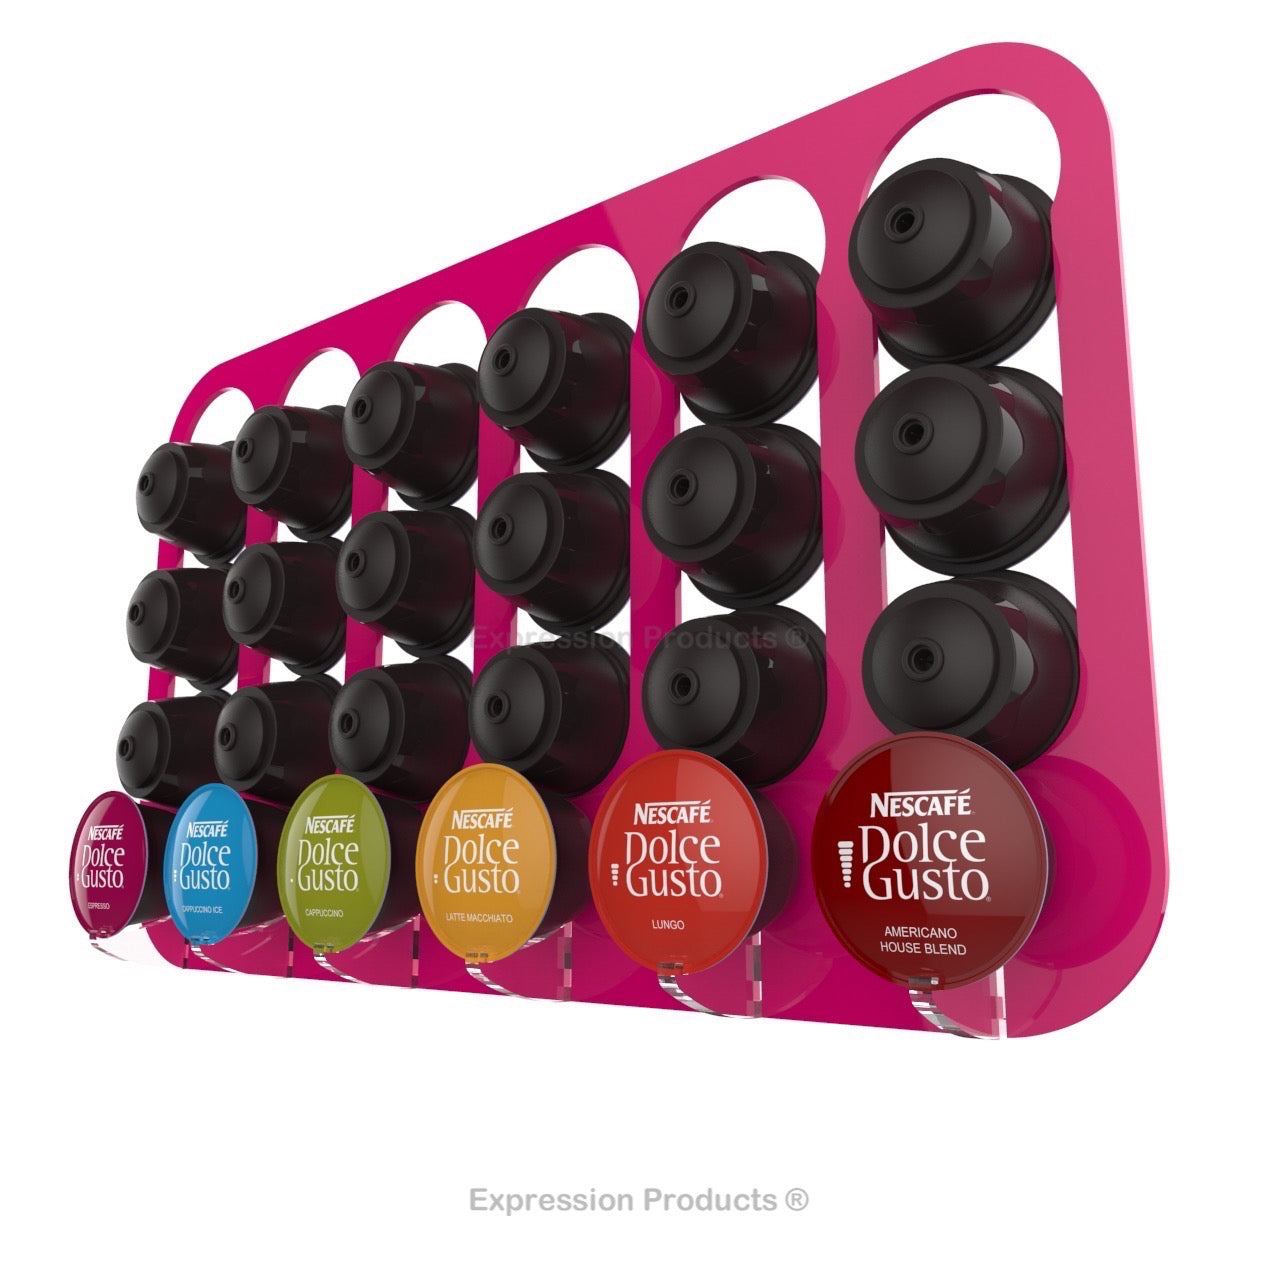 Dolce gusto coffee pod holder, wall mounted, half height.  Shown in pink holding 24 pods